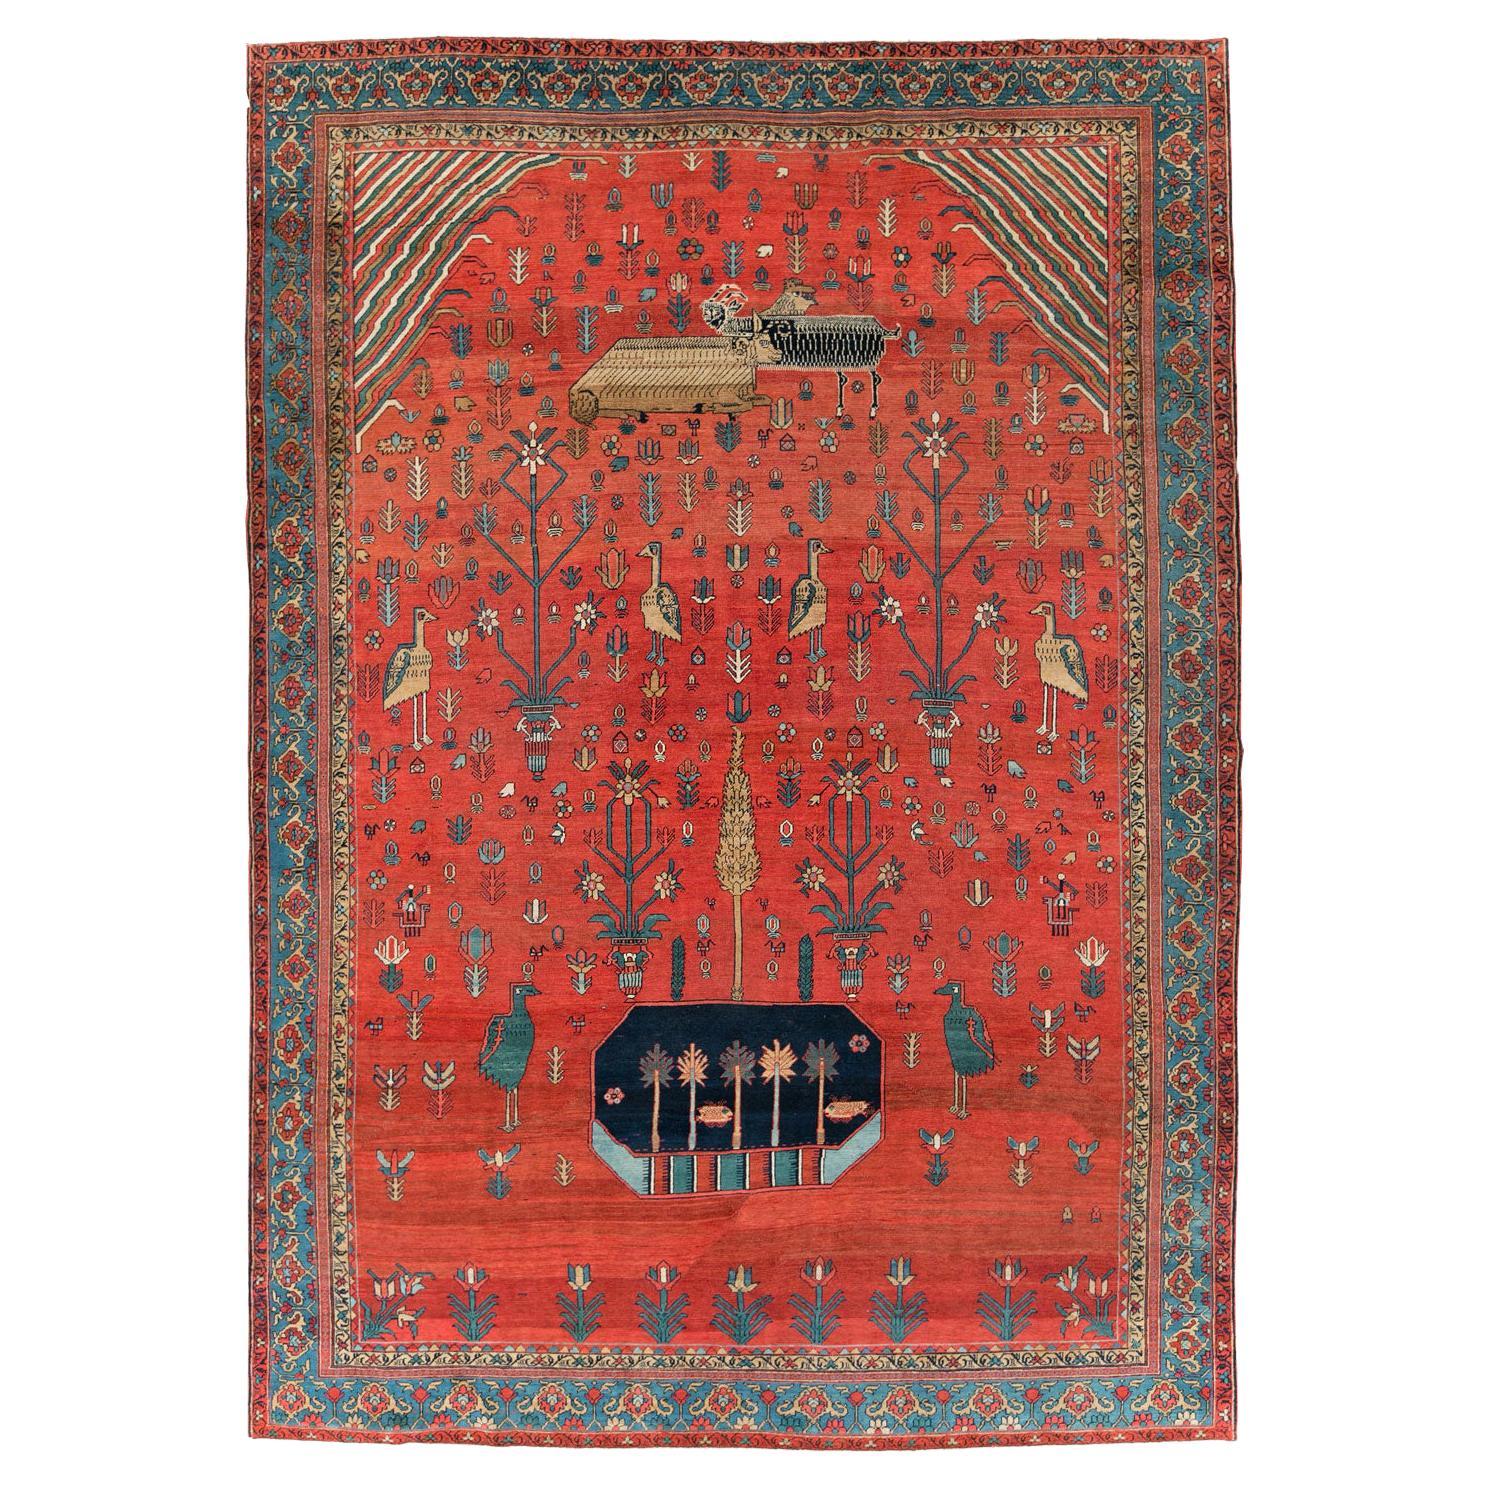 What do Persian rugs symbolize?